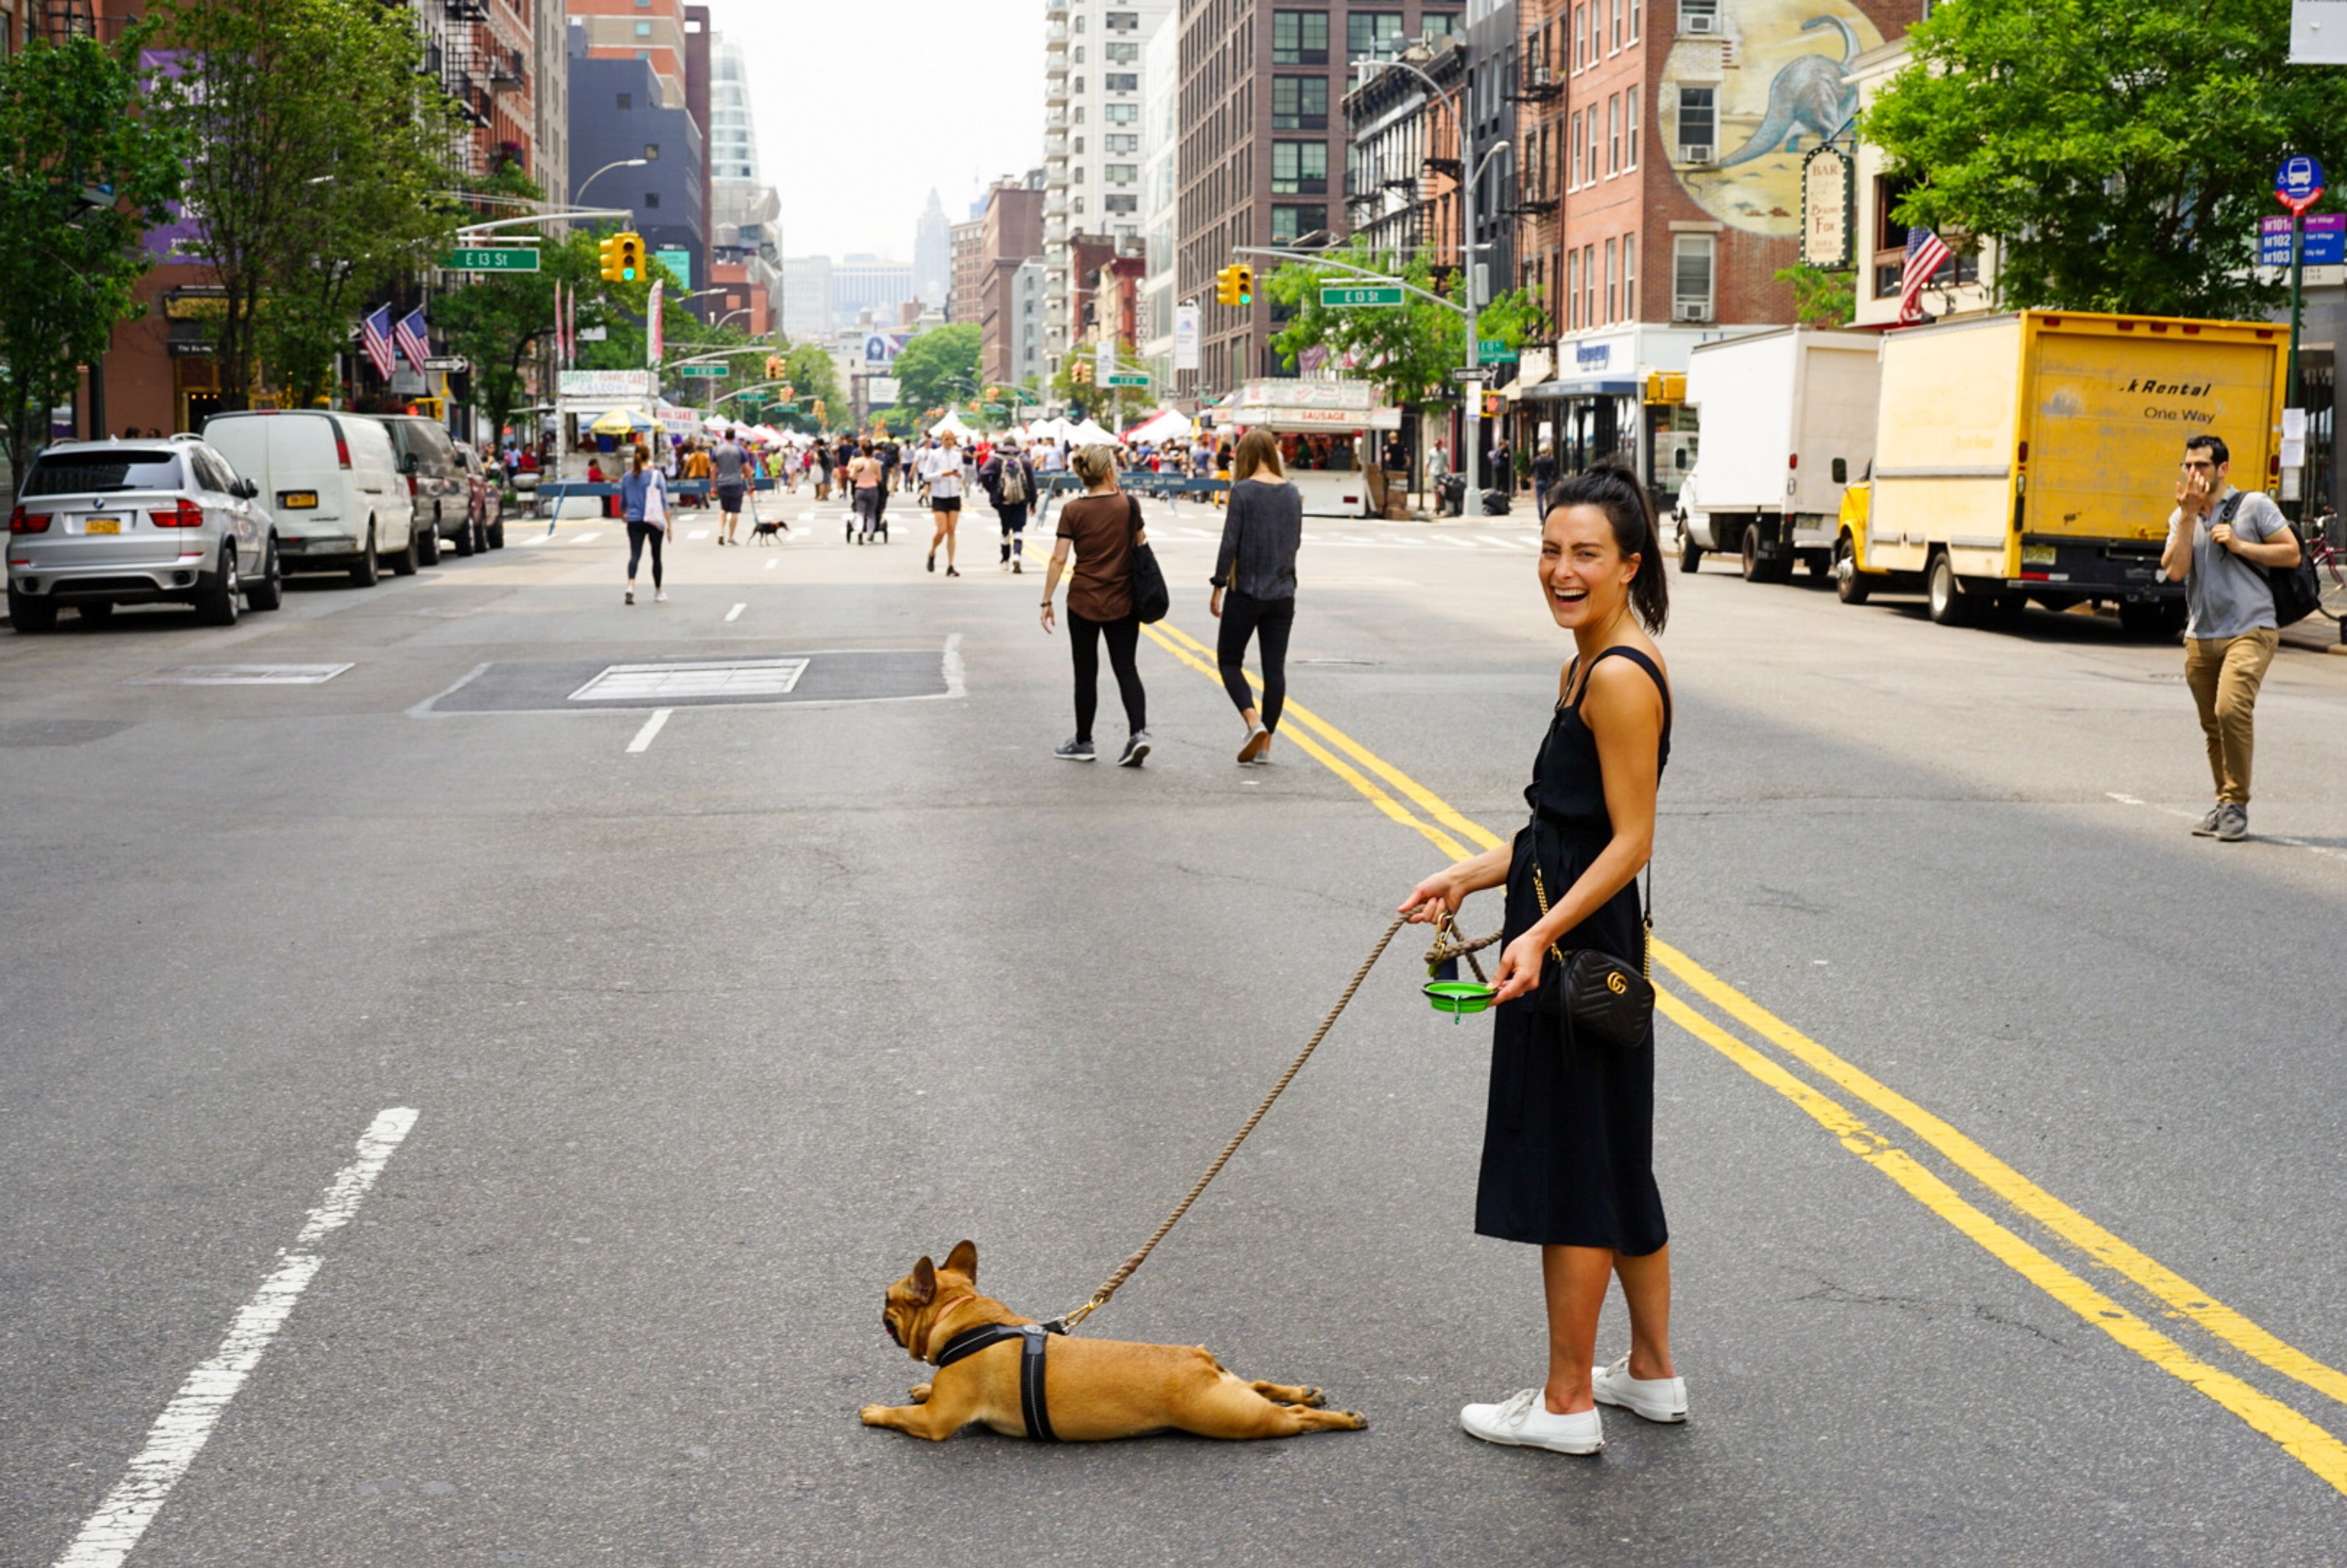 Small dogs in big cities - building cultural understanding